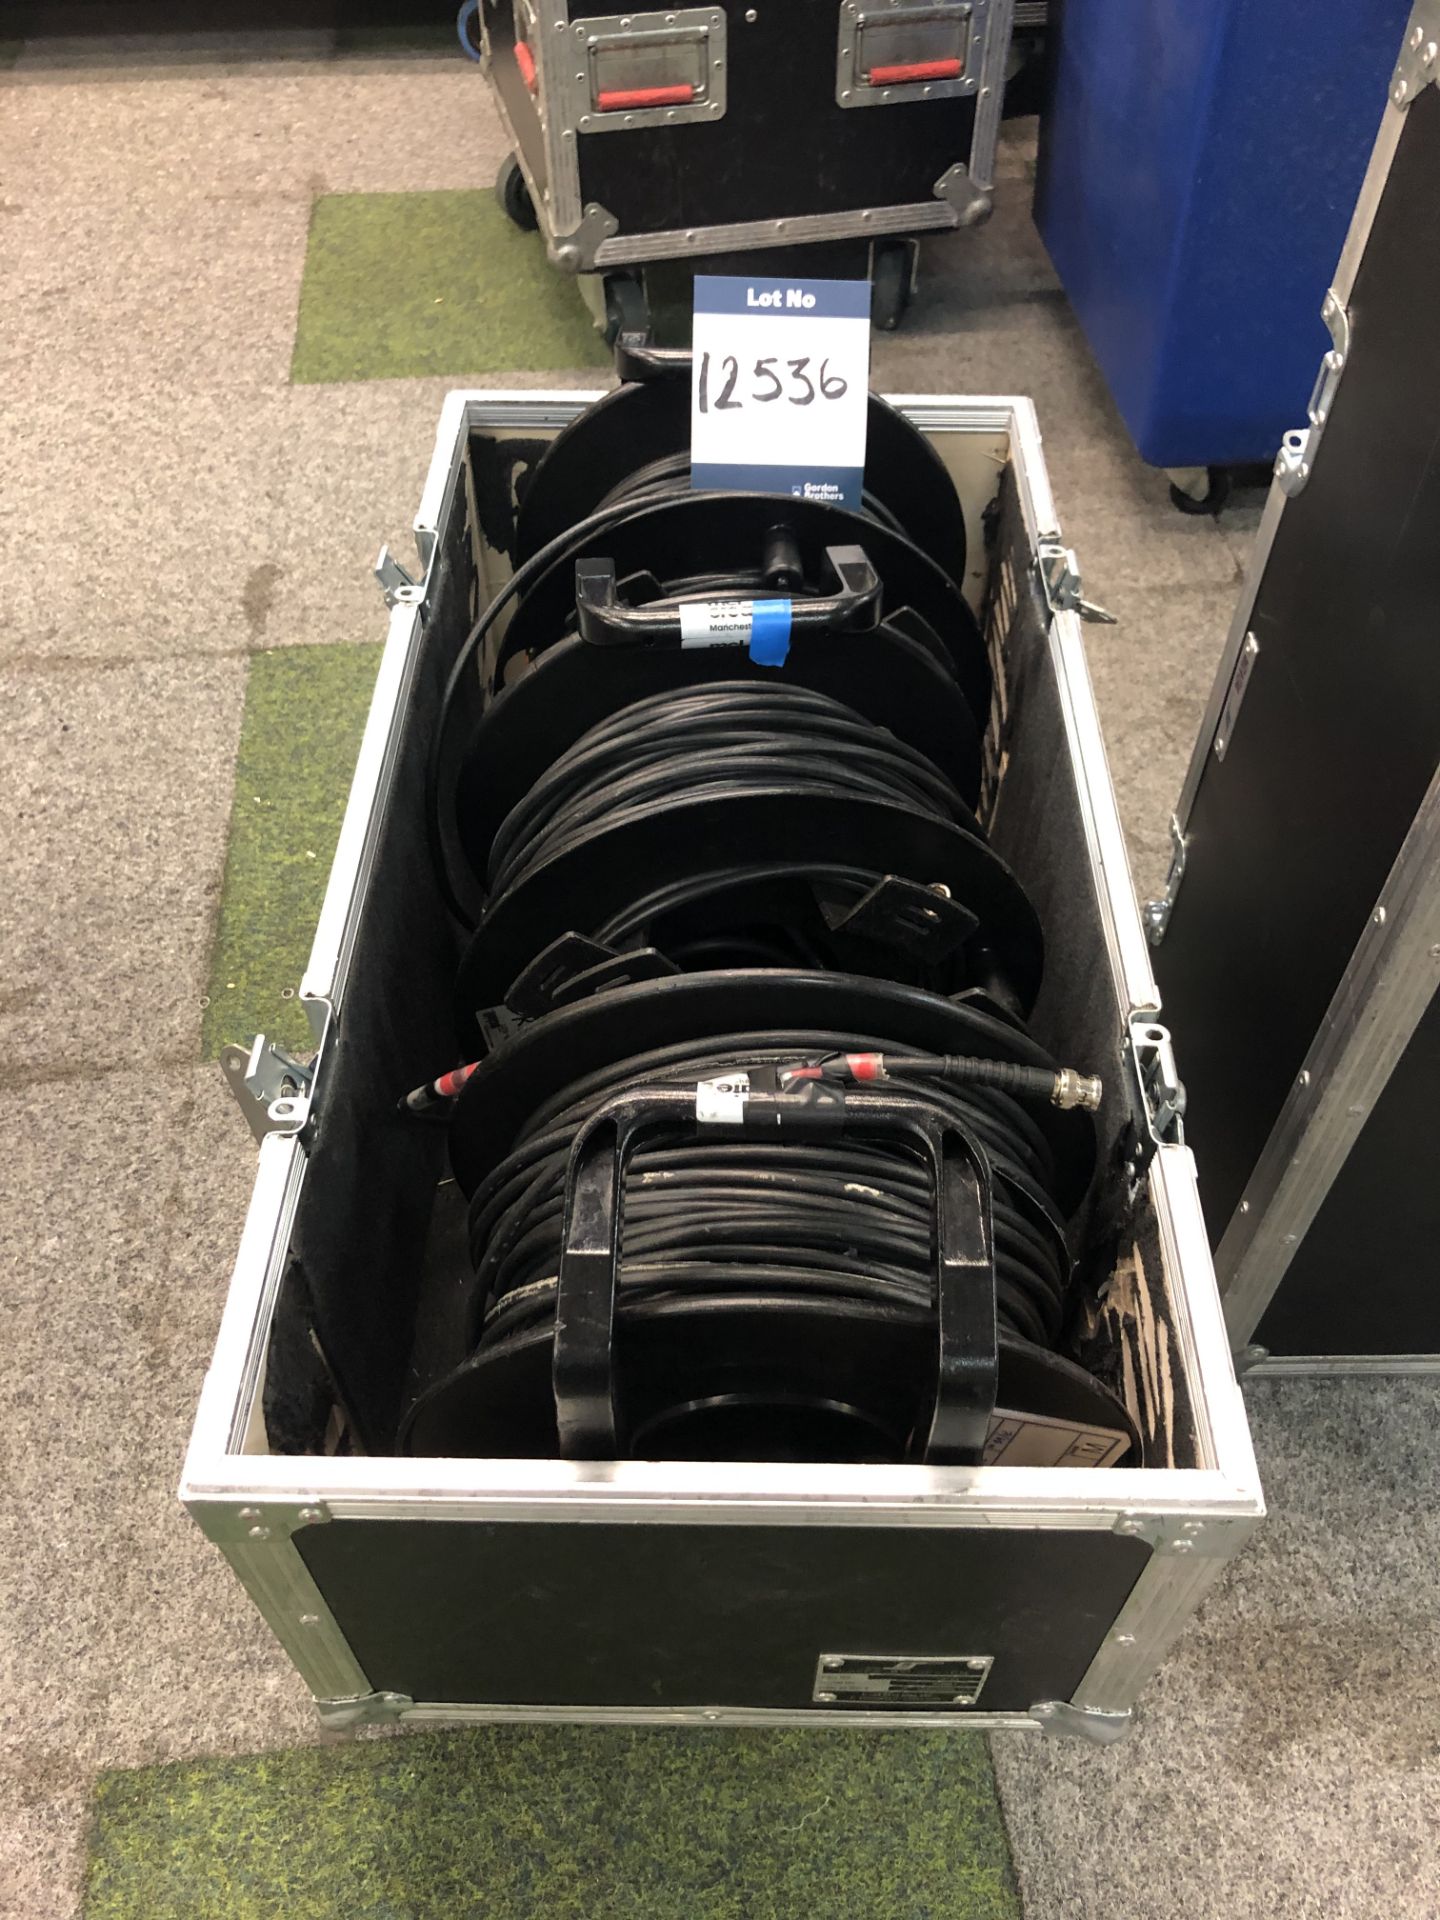 3x No. 50m SDI cable reels in transit case